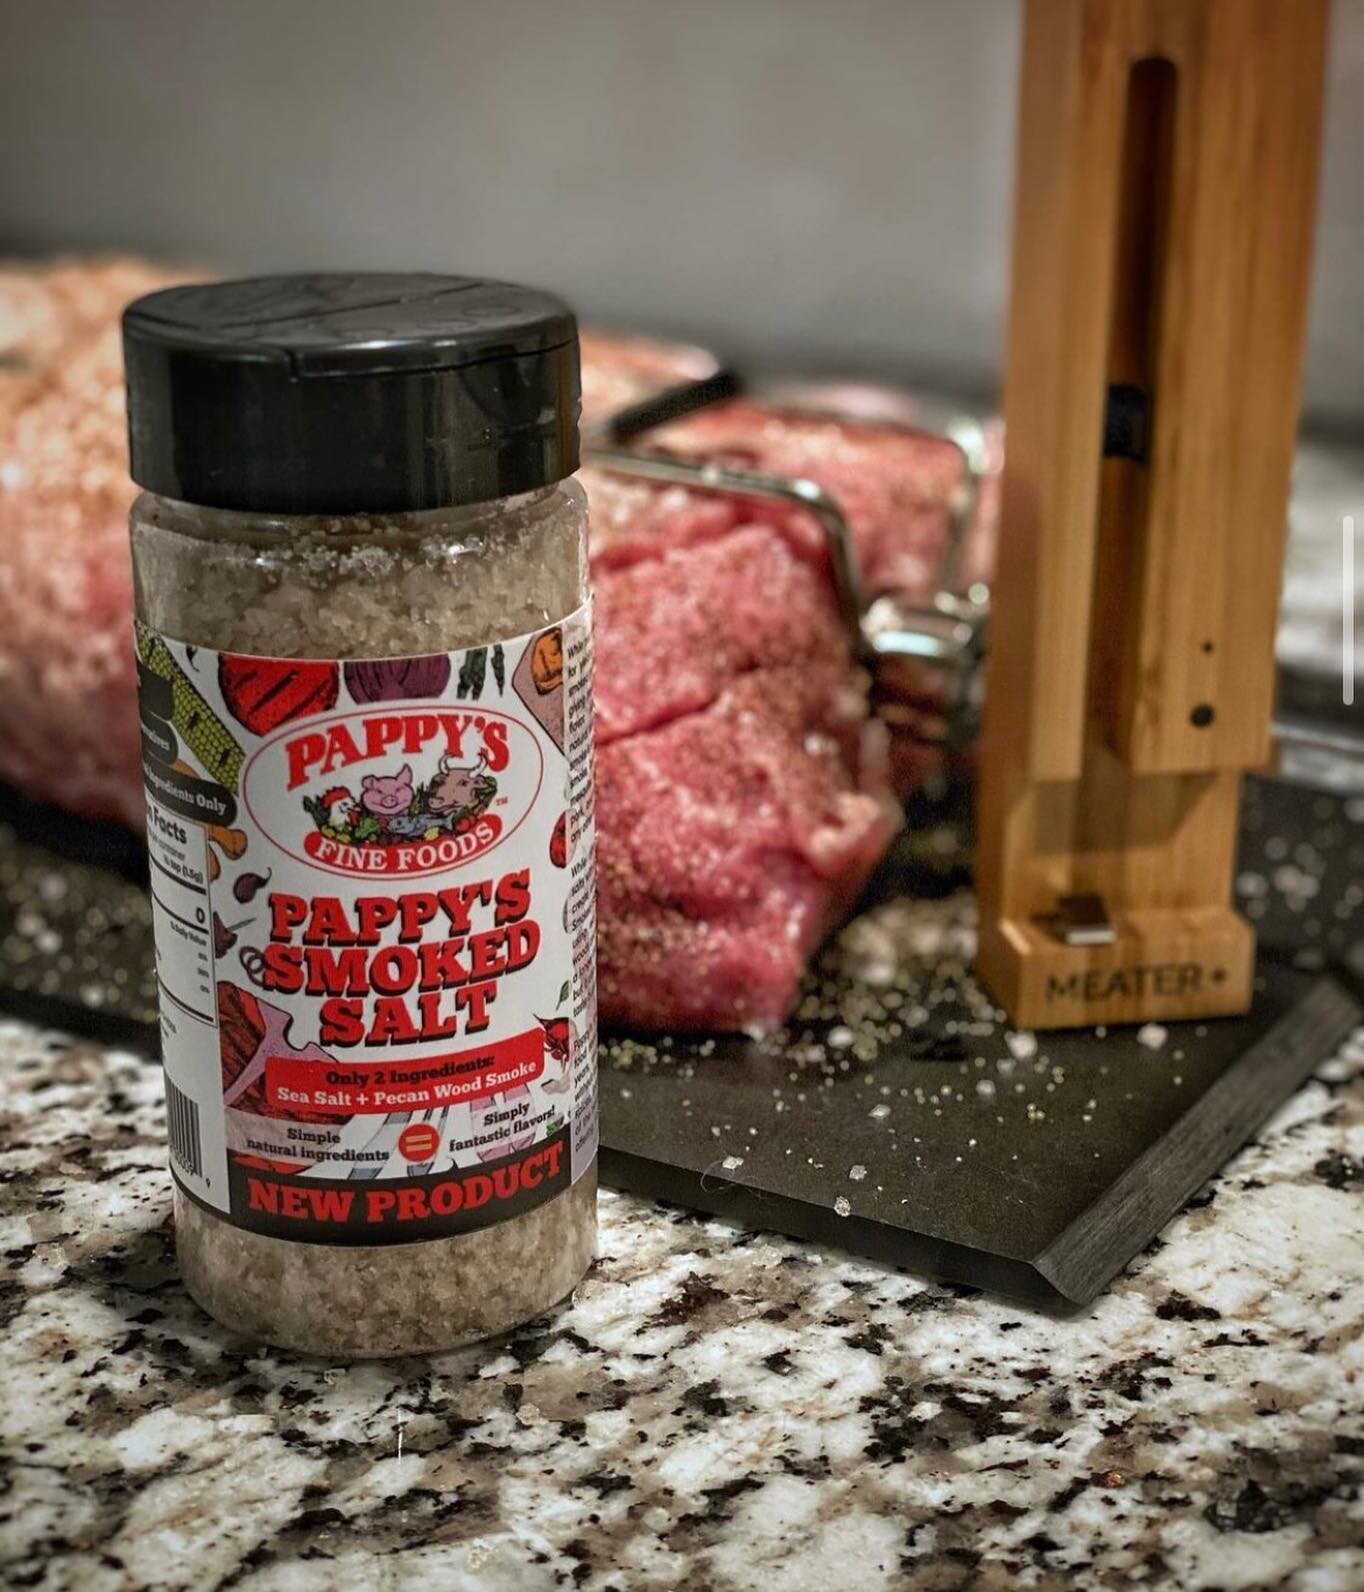 New product alert! We are excited to announce we&rsquo;ve partnered with @truesaltco for Pappy&rsquo;s smoked salt. You can find this product on Amazon 🤍